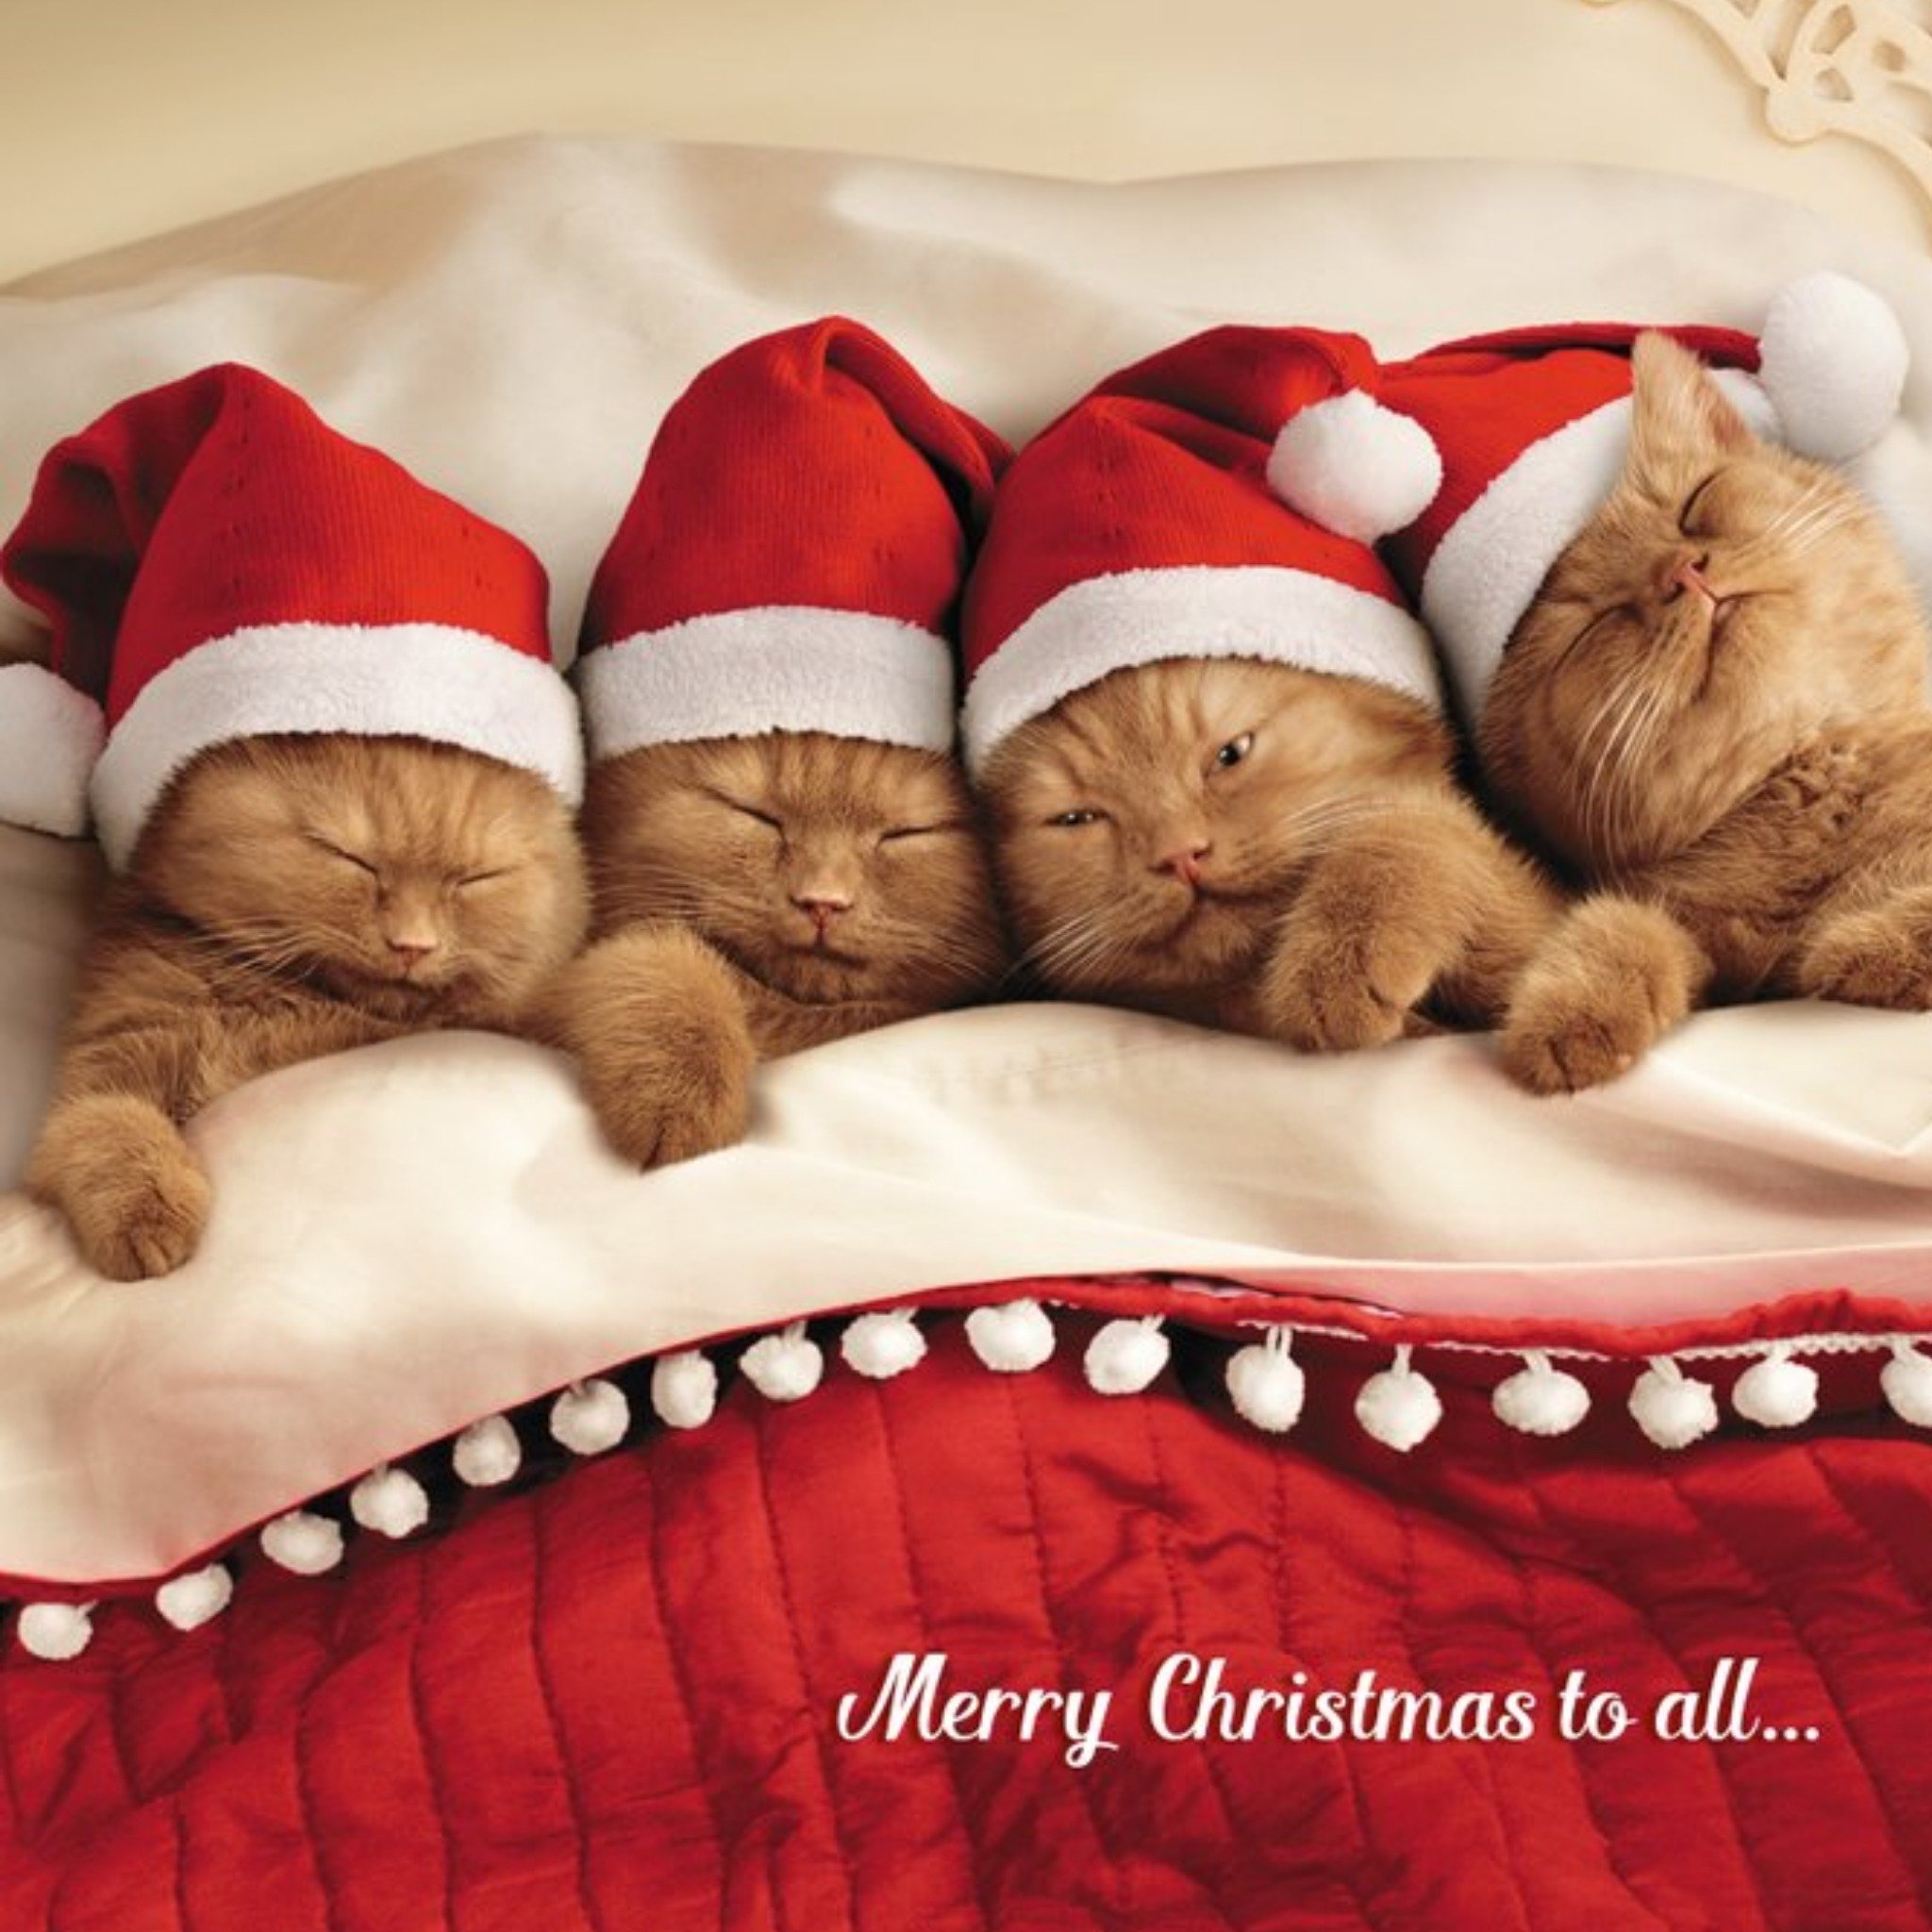 Moonpig Four Kittens Christmas Greetings Card, Large